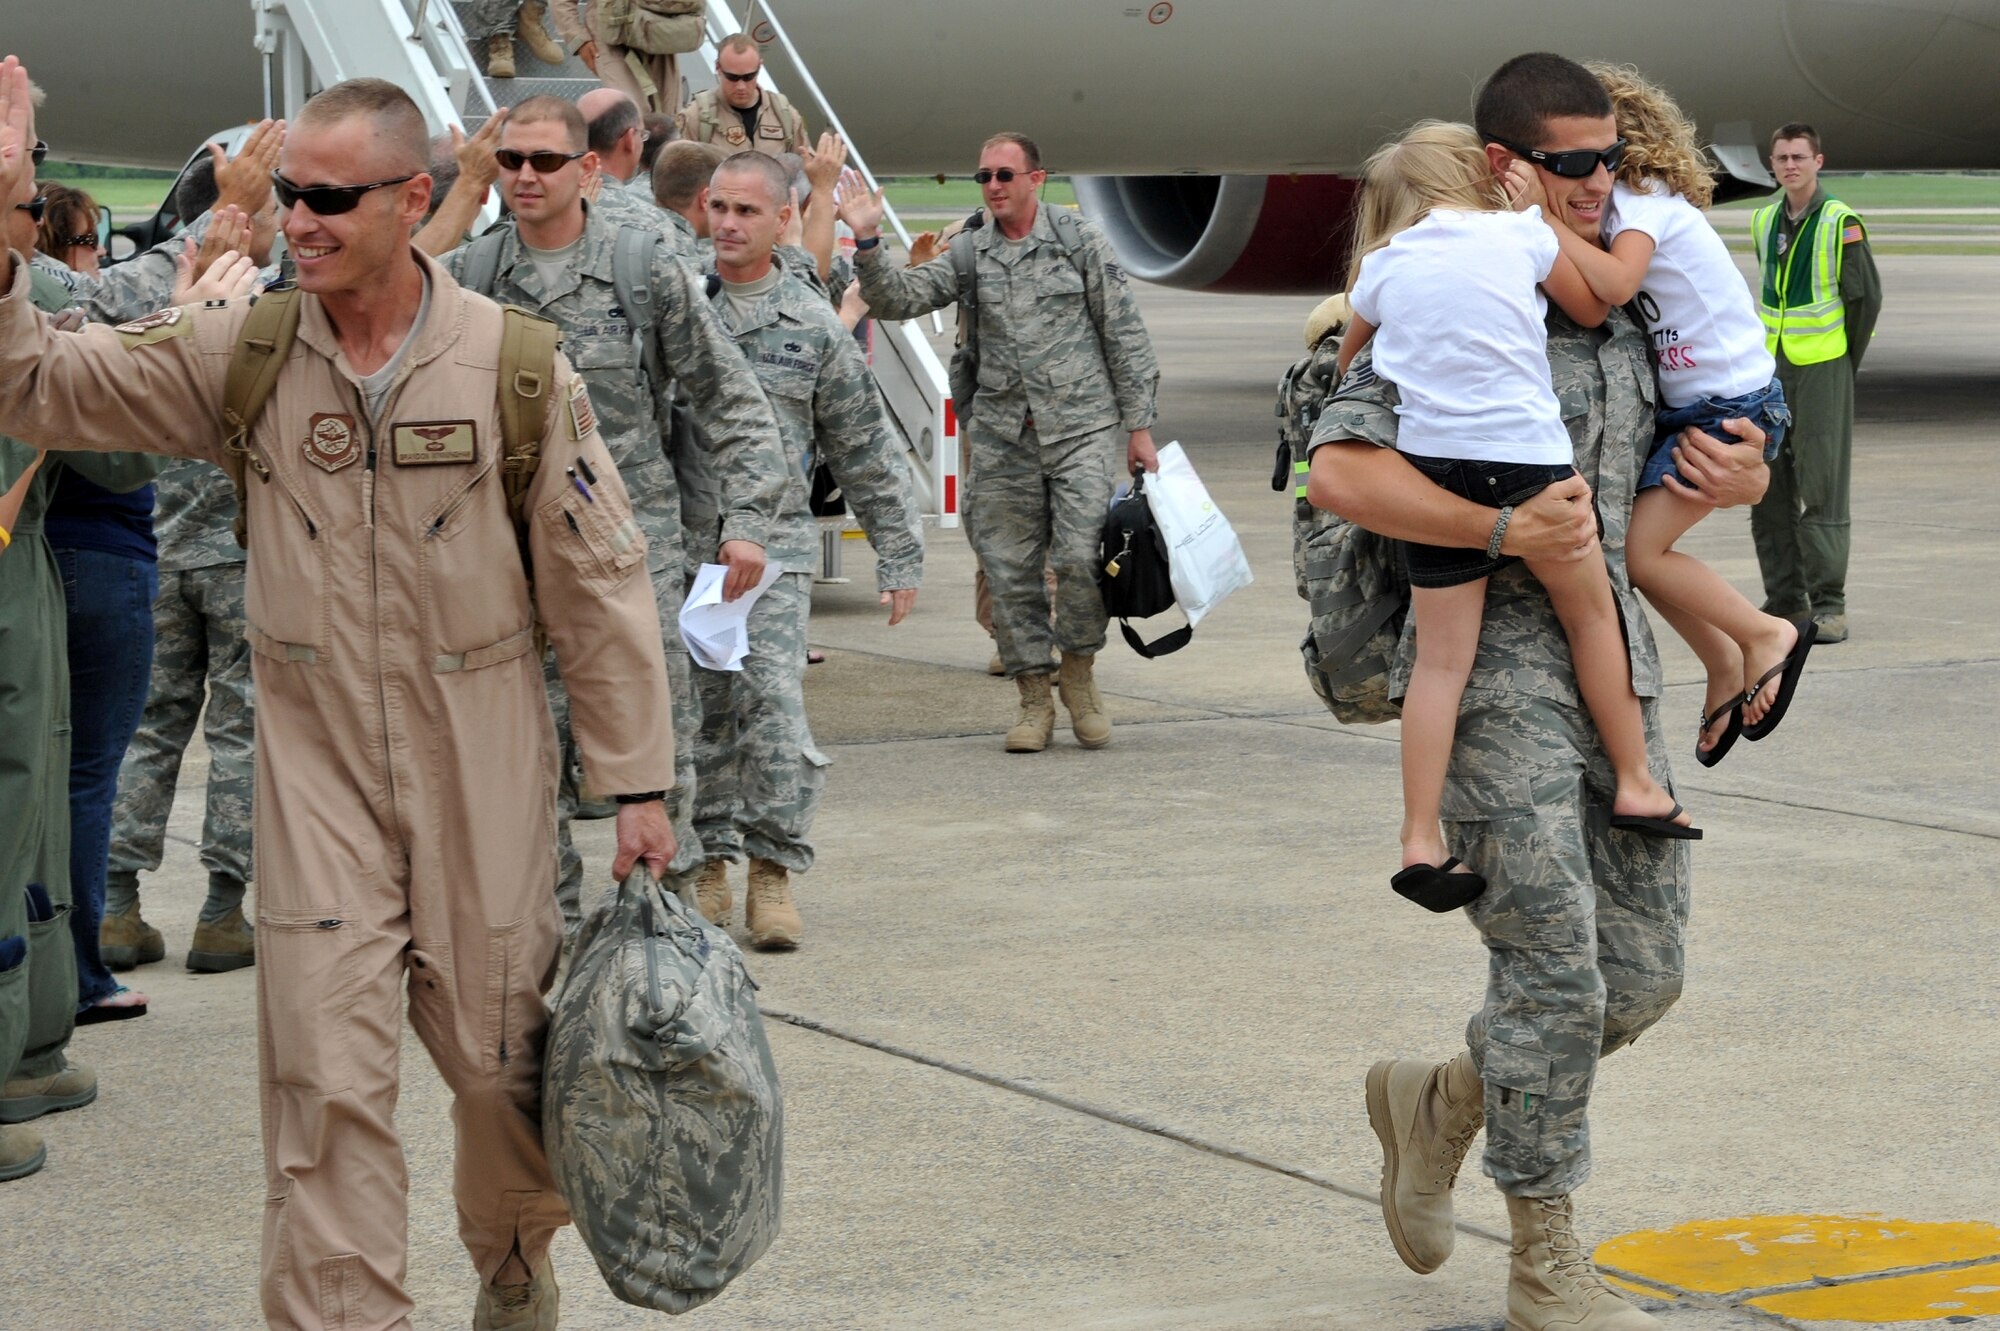 Staff Sgt. Rocky Hopper, 19th Component Maintenance Squadron fuel system journeyman, is greeted by his daughters Tiara, Tavia, on the base flightline, May 21, 2011, at Little Rock Air Force Base, Ark. Nearly 200 Team Little Rock Airmen reunited with family members and friends Saturday after returning from months of deployments supporting operations in Southwest Asia. (U.S. Air Force photo/Staff Sgt. Chris Willis)